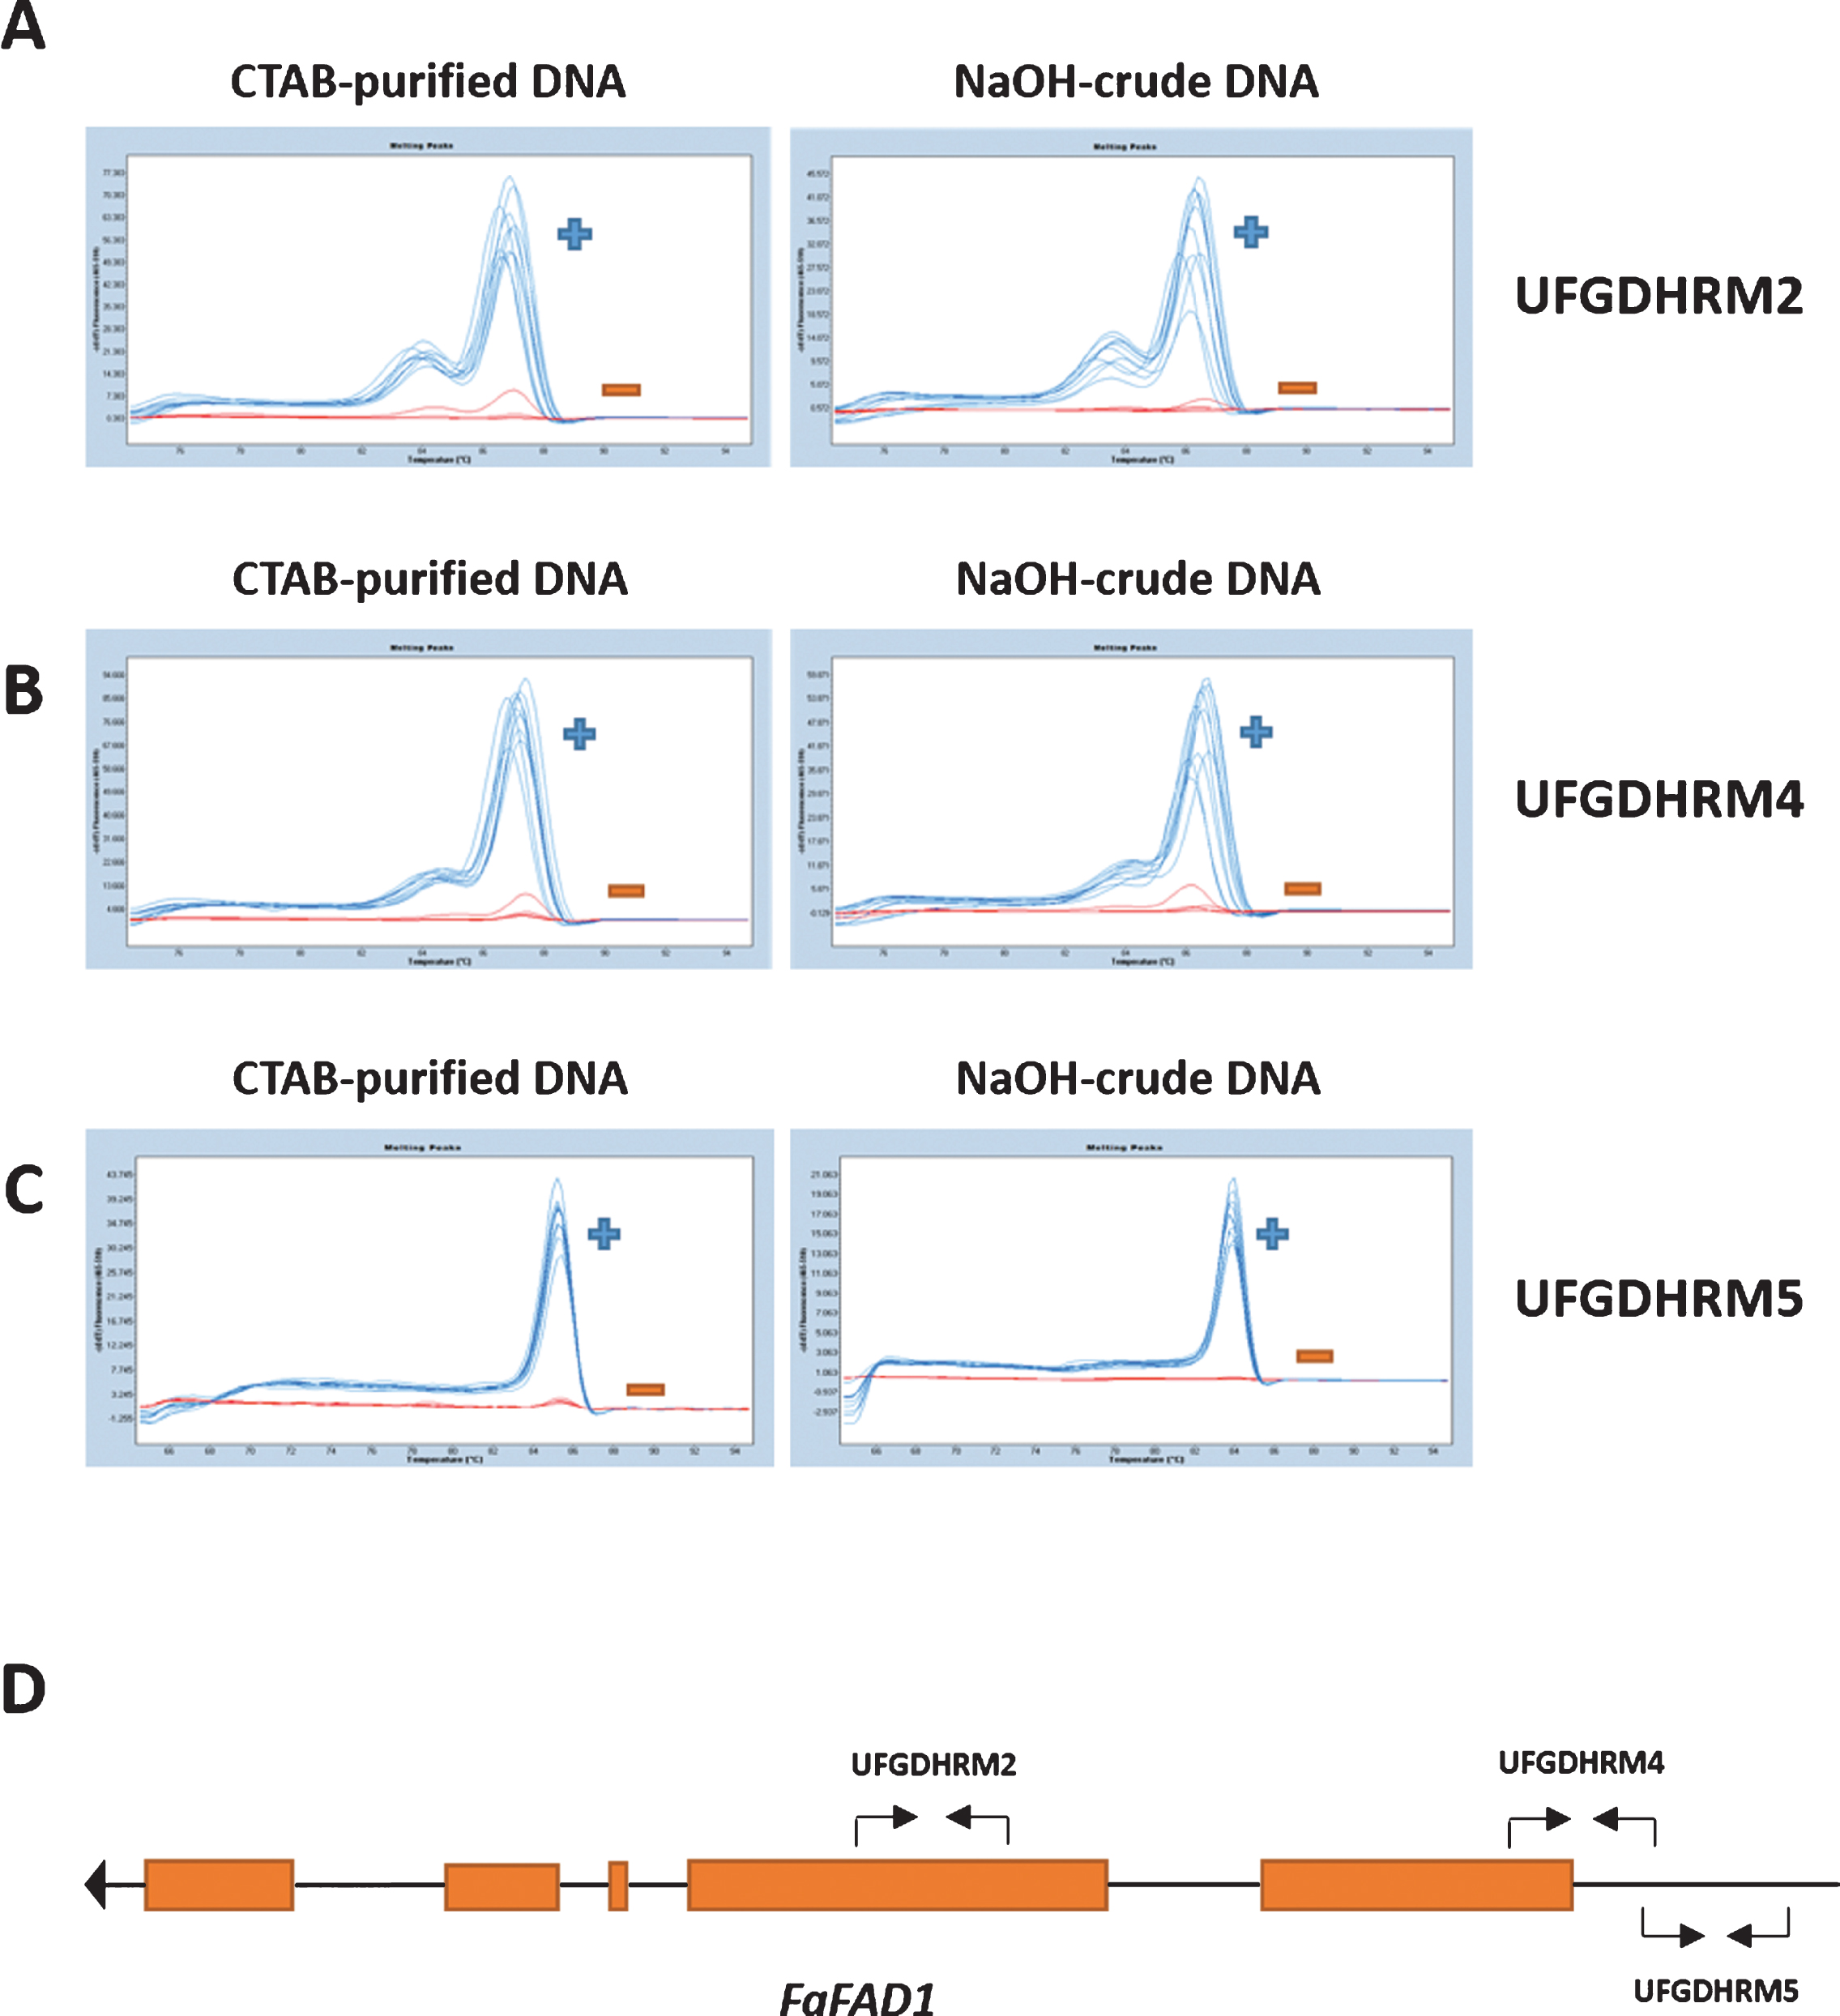 The detection of FaFAD1 using high-throughput HRM markers, UFGDHRM2, UFGDHRM4 and UFGDHRM5, in strawberry. Three primer sets were developed for HRM analysis. The HRM results from CTAB-DNA and NaOH-crude DNA extracts (5-fold dilution) were compared for three markers (A: UFGDHRM2, B: UFGDHRM4, and C: UFGDHRM5). BSA (0.1%) and PVP (1%) were included in all PCR reactions. The blue curve indicates presence of FaFAD1, while the red line indicates the absence (deletion) of FaFAD1. (D) The annotated FAD1 gene model from F. vesca was obtained from the Genome Database for Rosaceae (www.rosaceae.org). The primer location for three HRM markers was noted by black arrows.